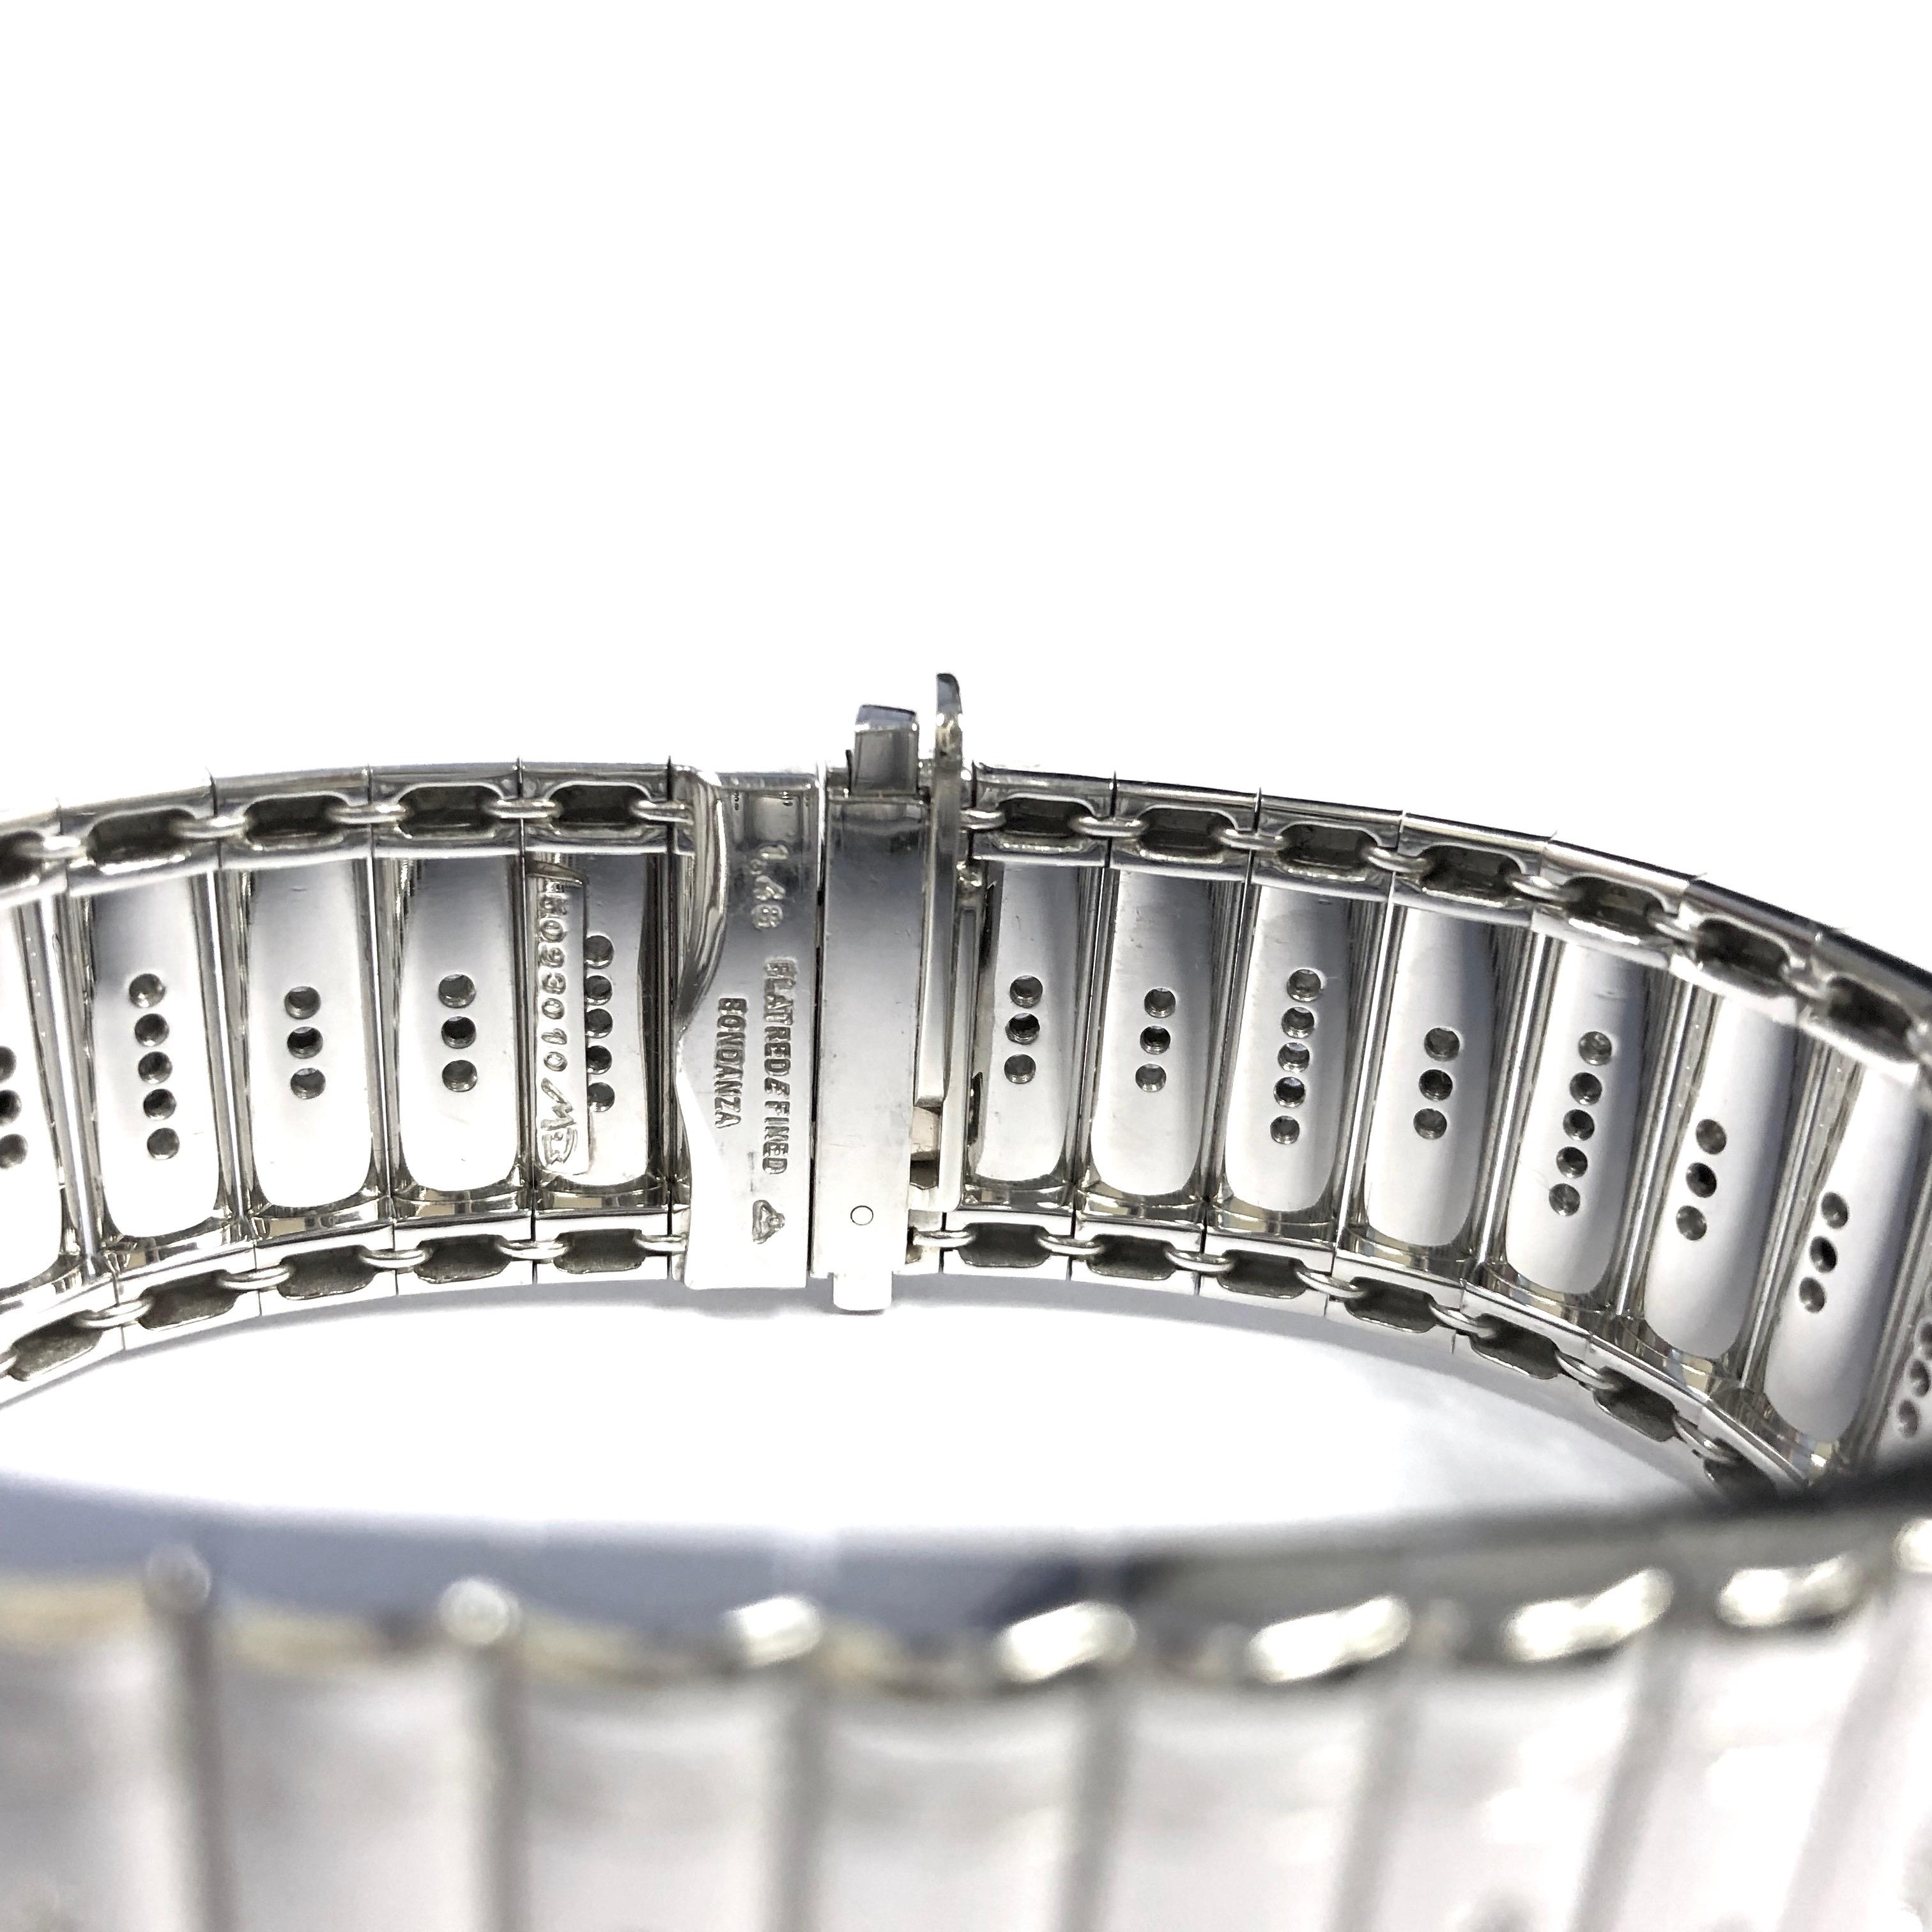 Magnificent Platinum diamond Metropolitan bracelet created by Michael Bondanza.
Featuring 133 round brilliant cut diamonds (Color: E-F, Clarity: VS), total weight: 1.48 carats (stamped).
Measuements:
Width: 20.5mm, 13/16 inches
Length: 6.5